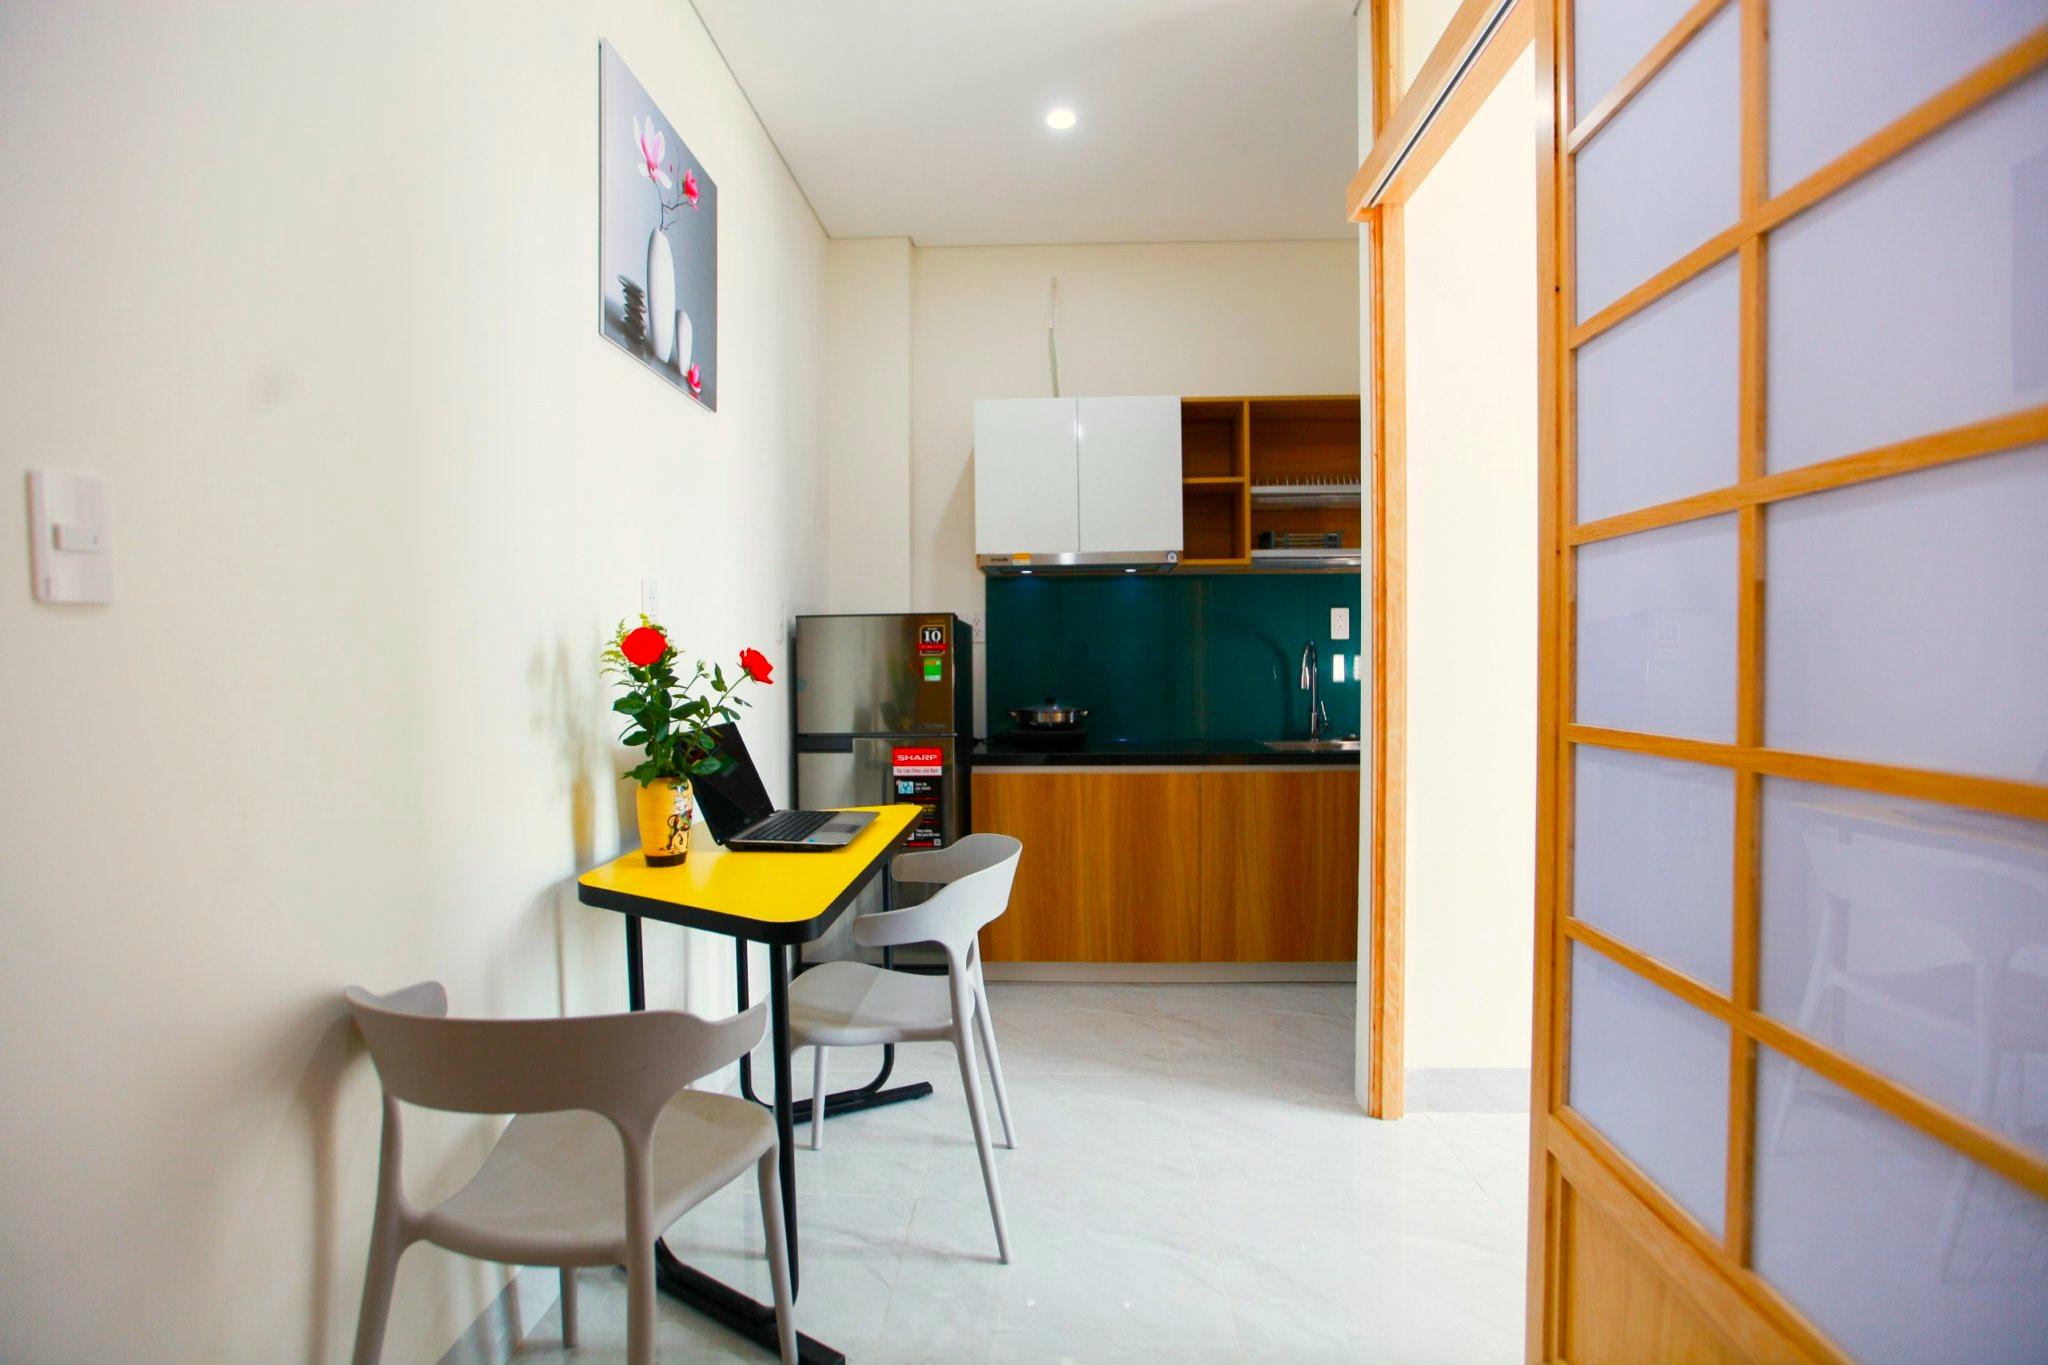 Selling apartment building on An Thuong 5 street